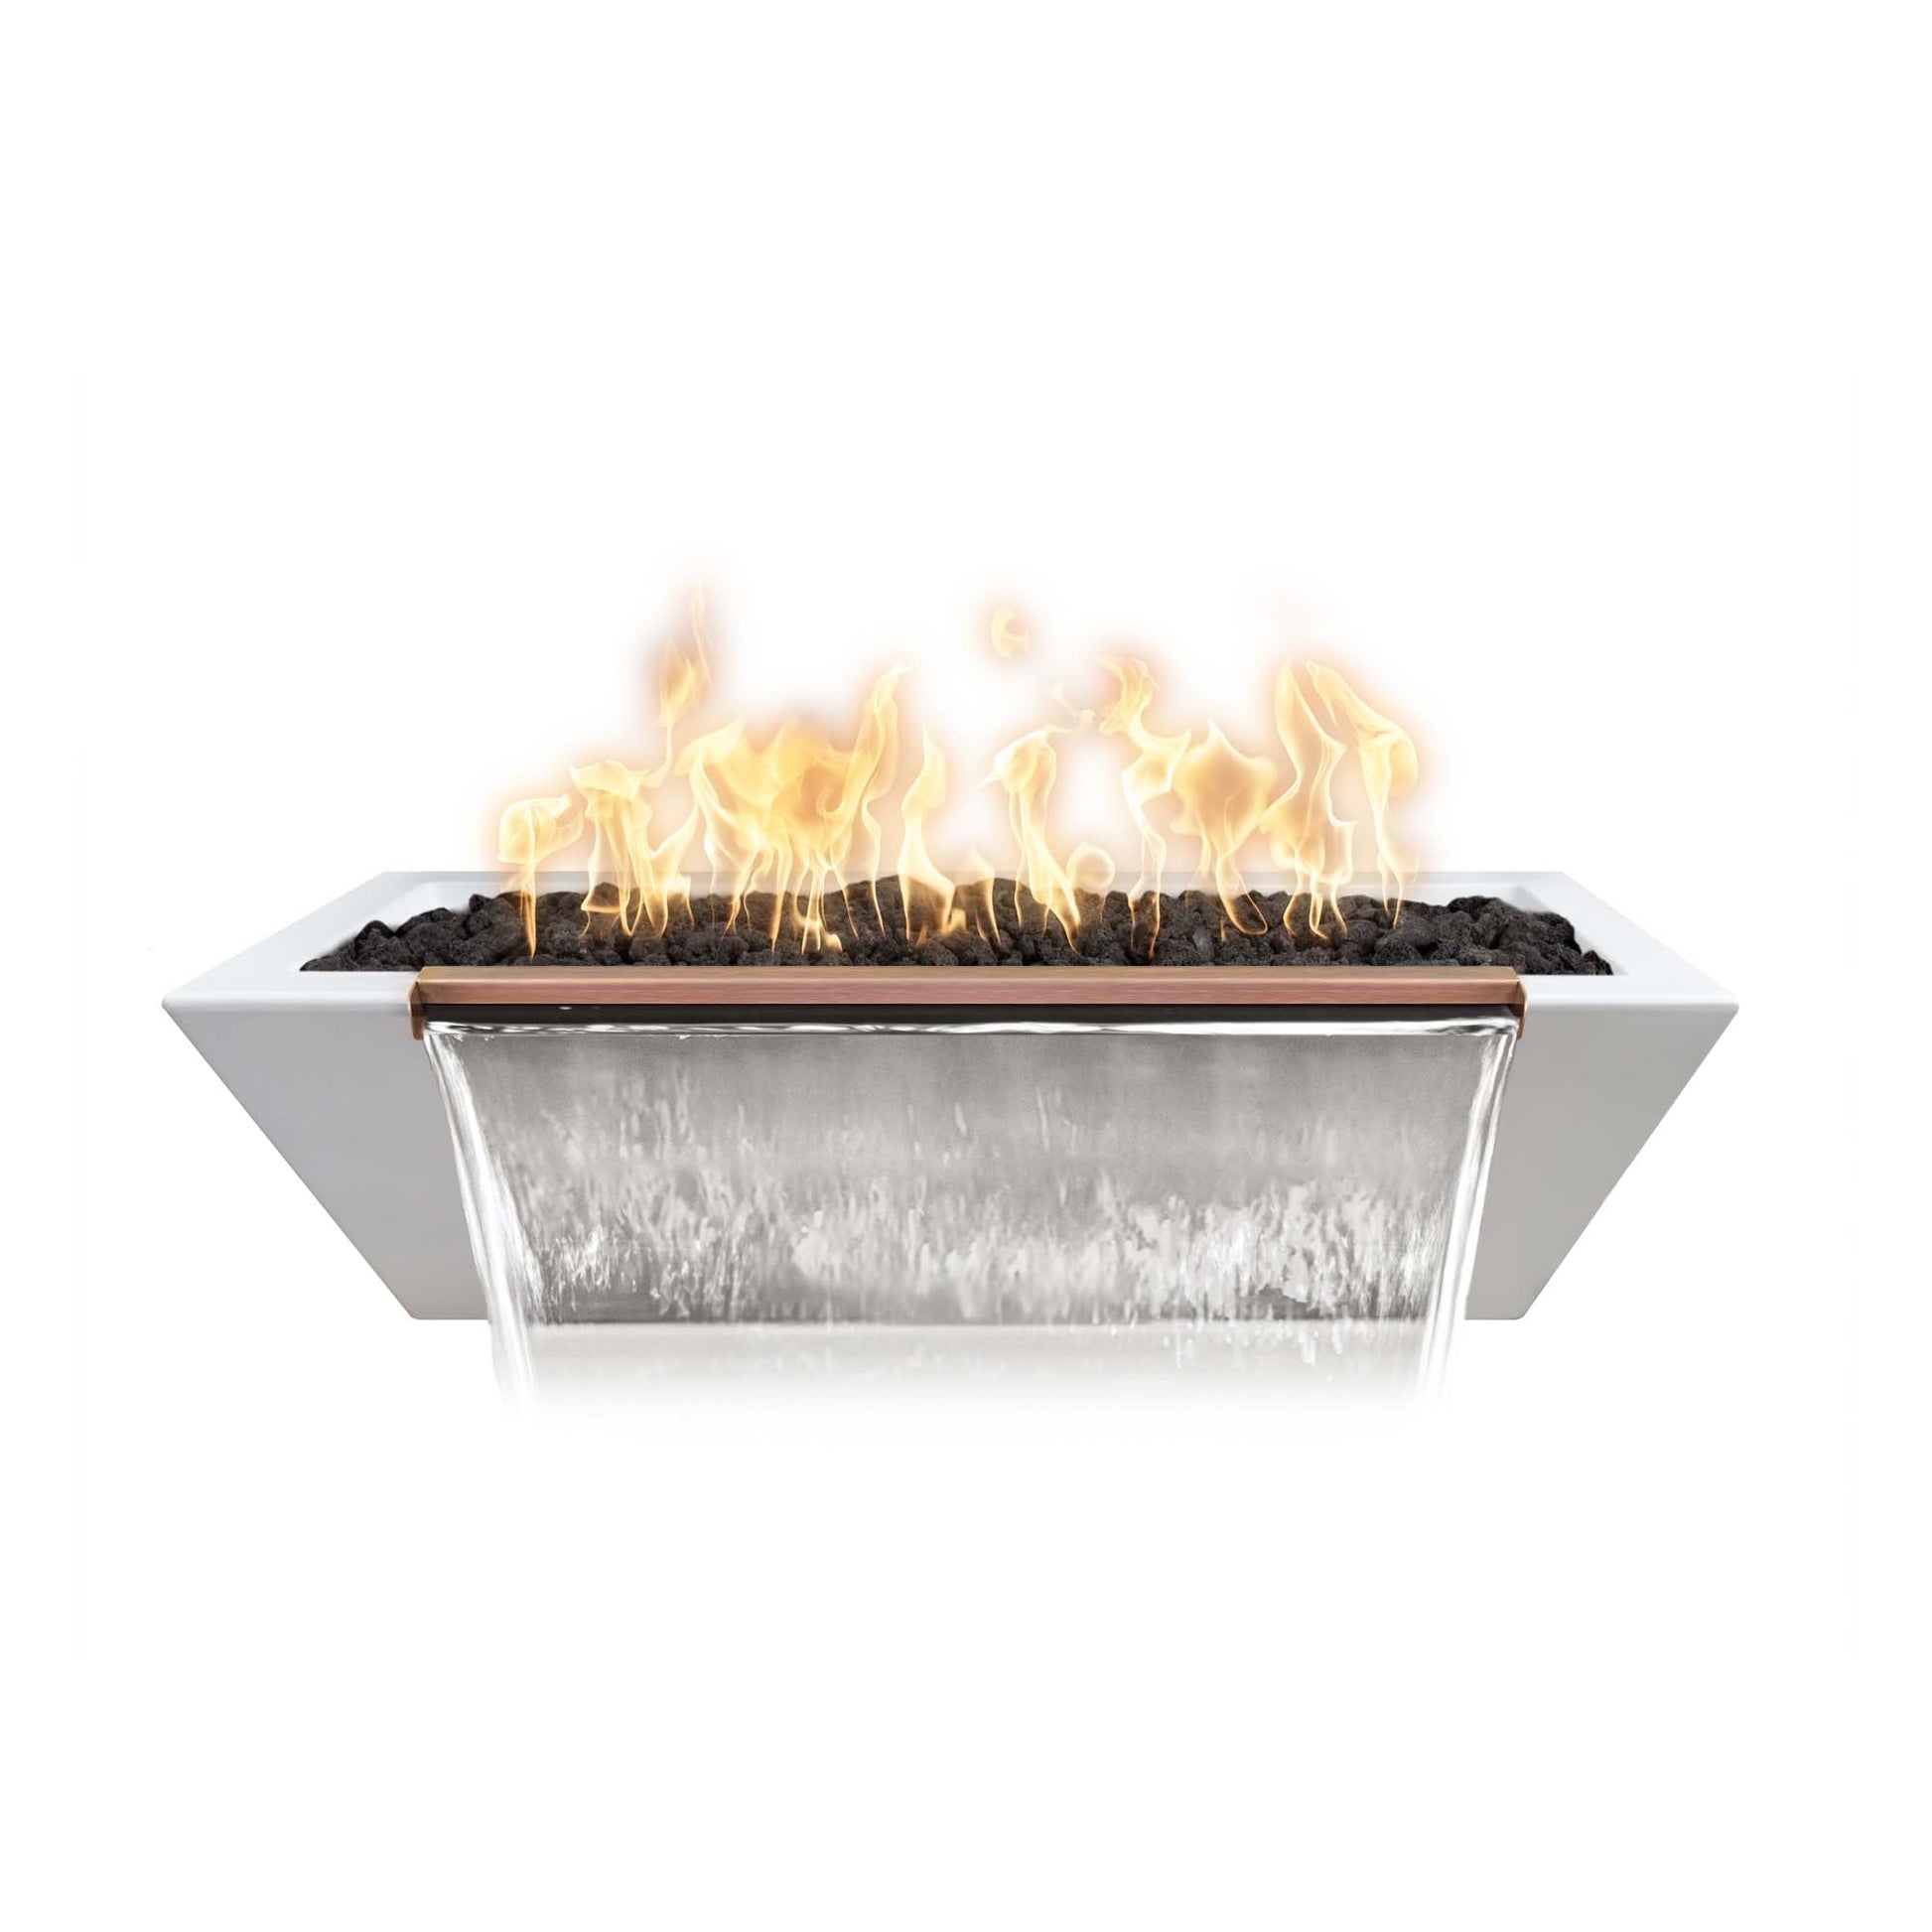 The Outdoor Plus Linear Maya 72" Metallic Slate GFRC Concrete Liquid Propane Fire & Water Bowl with Match Lit Ignition